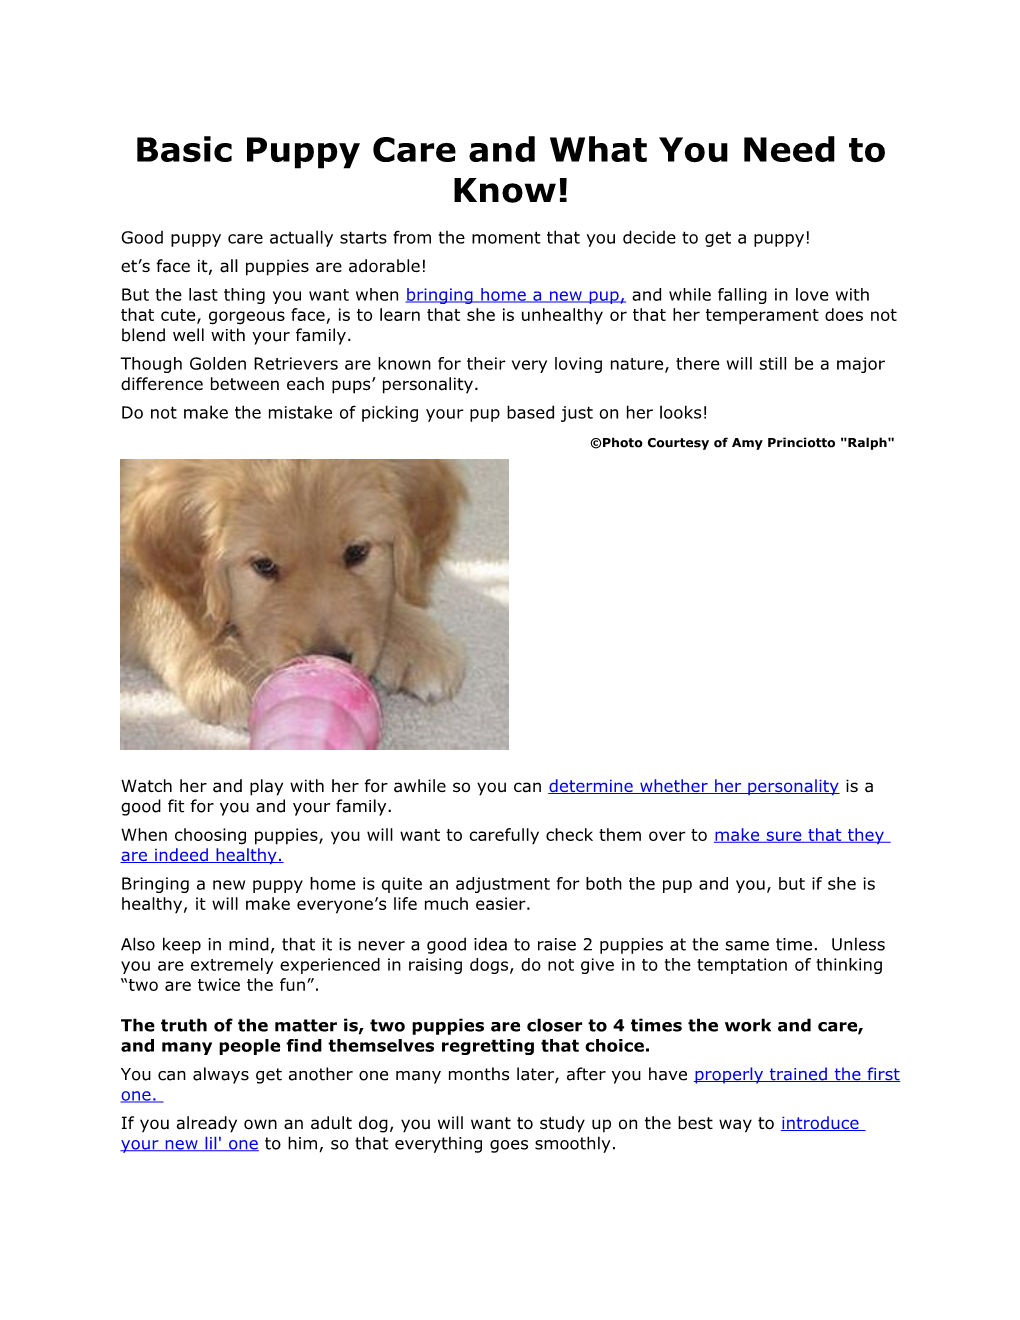 Basic Puppy Care and What You Need to Know!